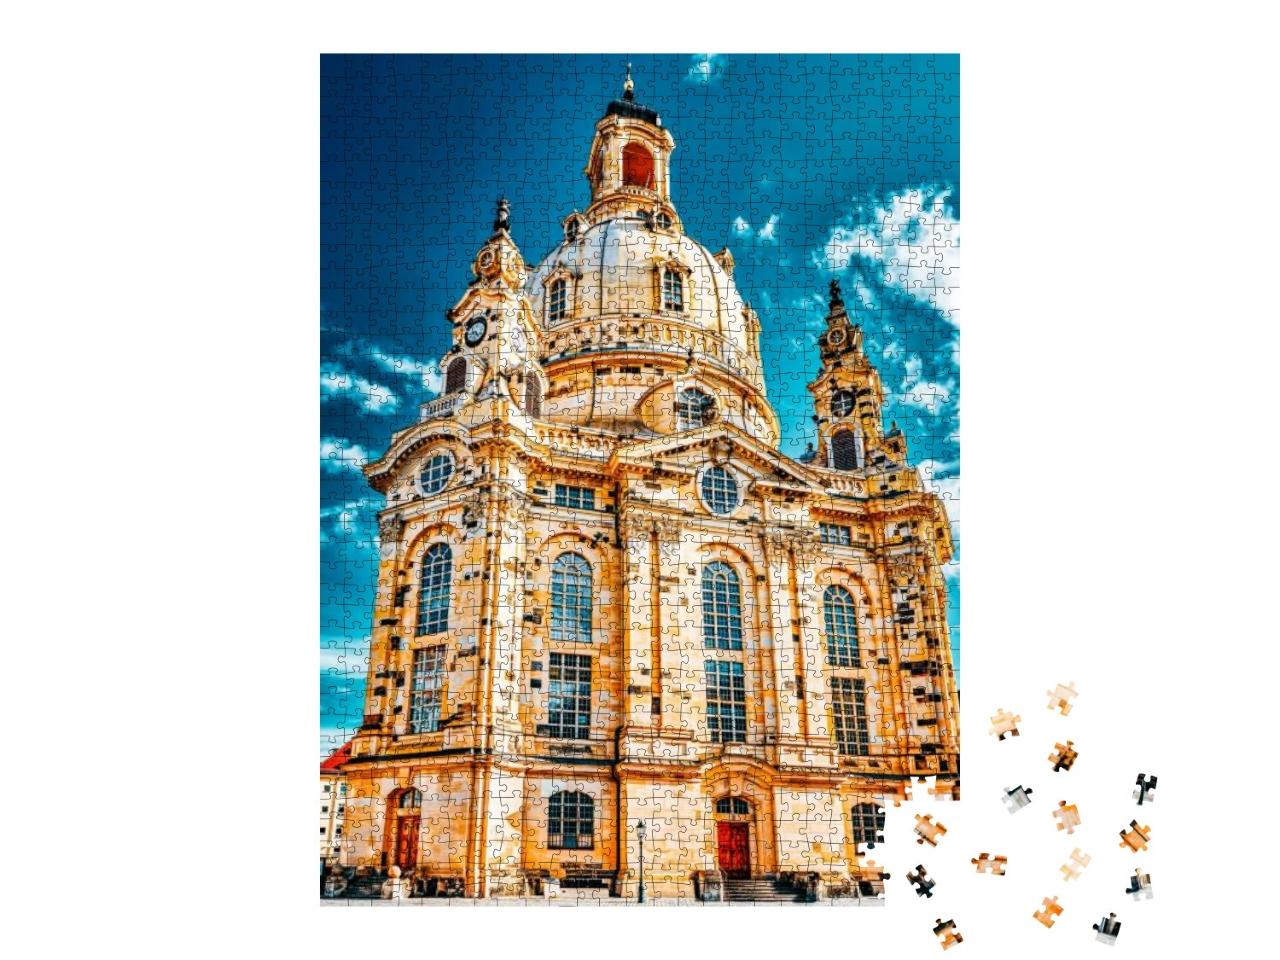 Dresden Frauenkirche Church of Our Lady is a Lutheran Chu... Jigsaw Puzzle with 1000 pieces